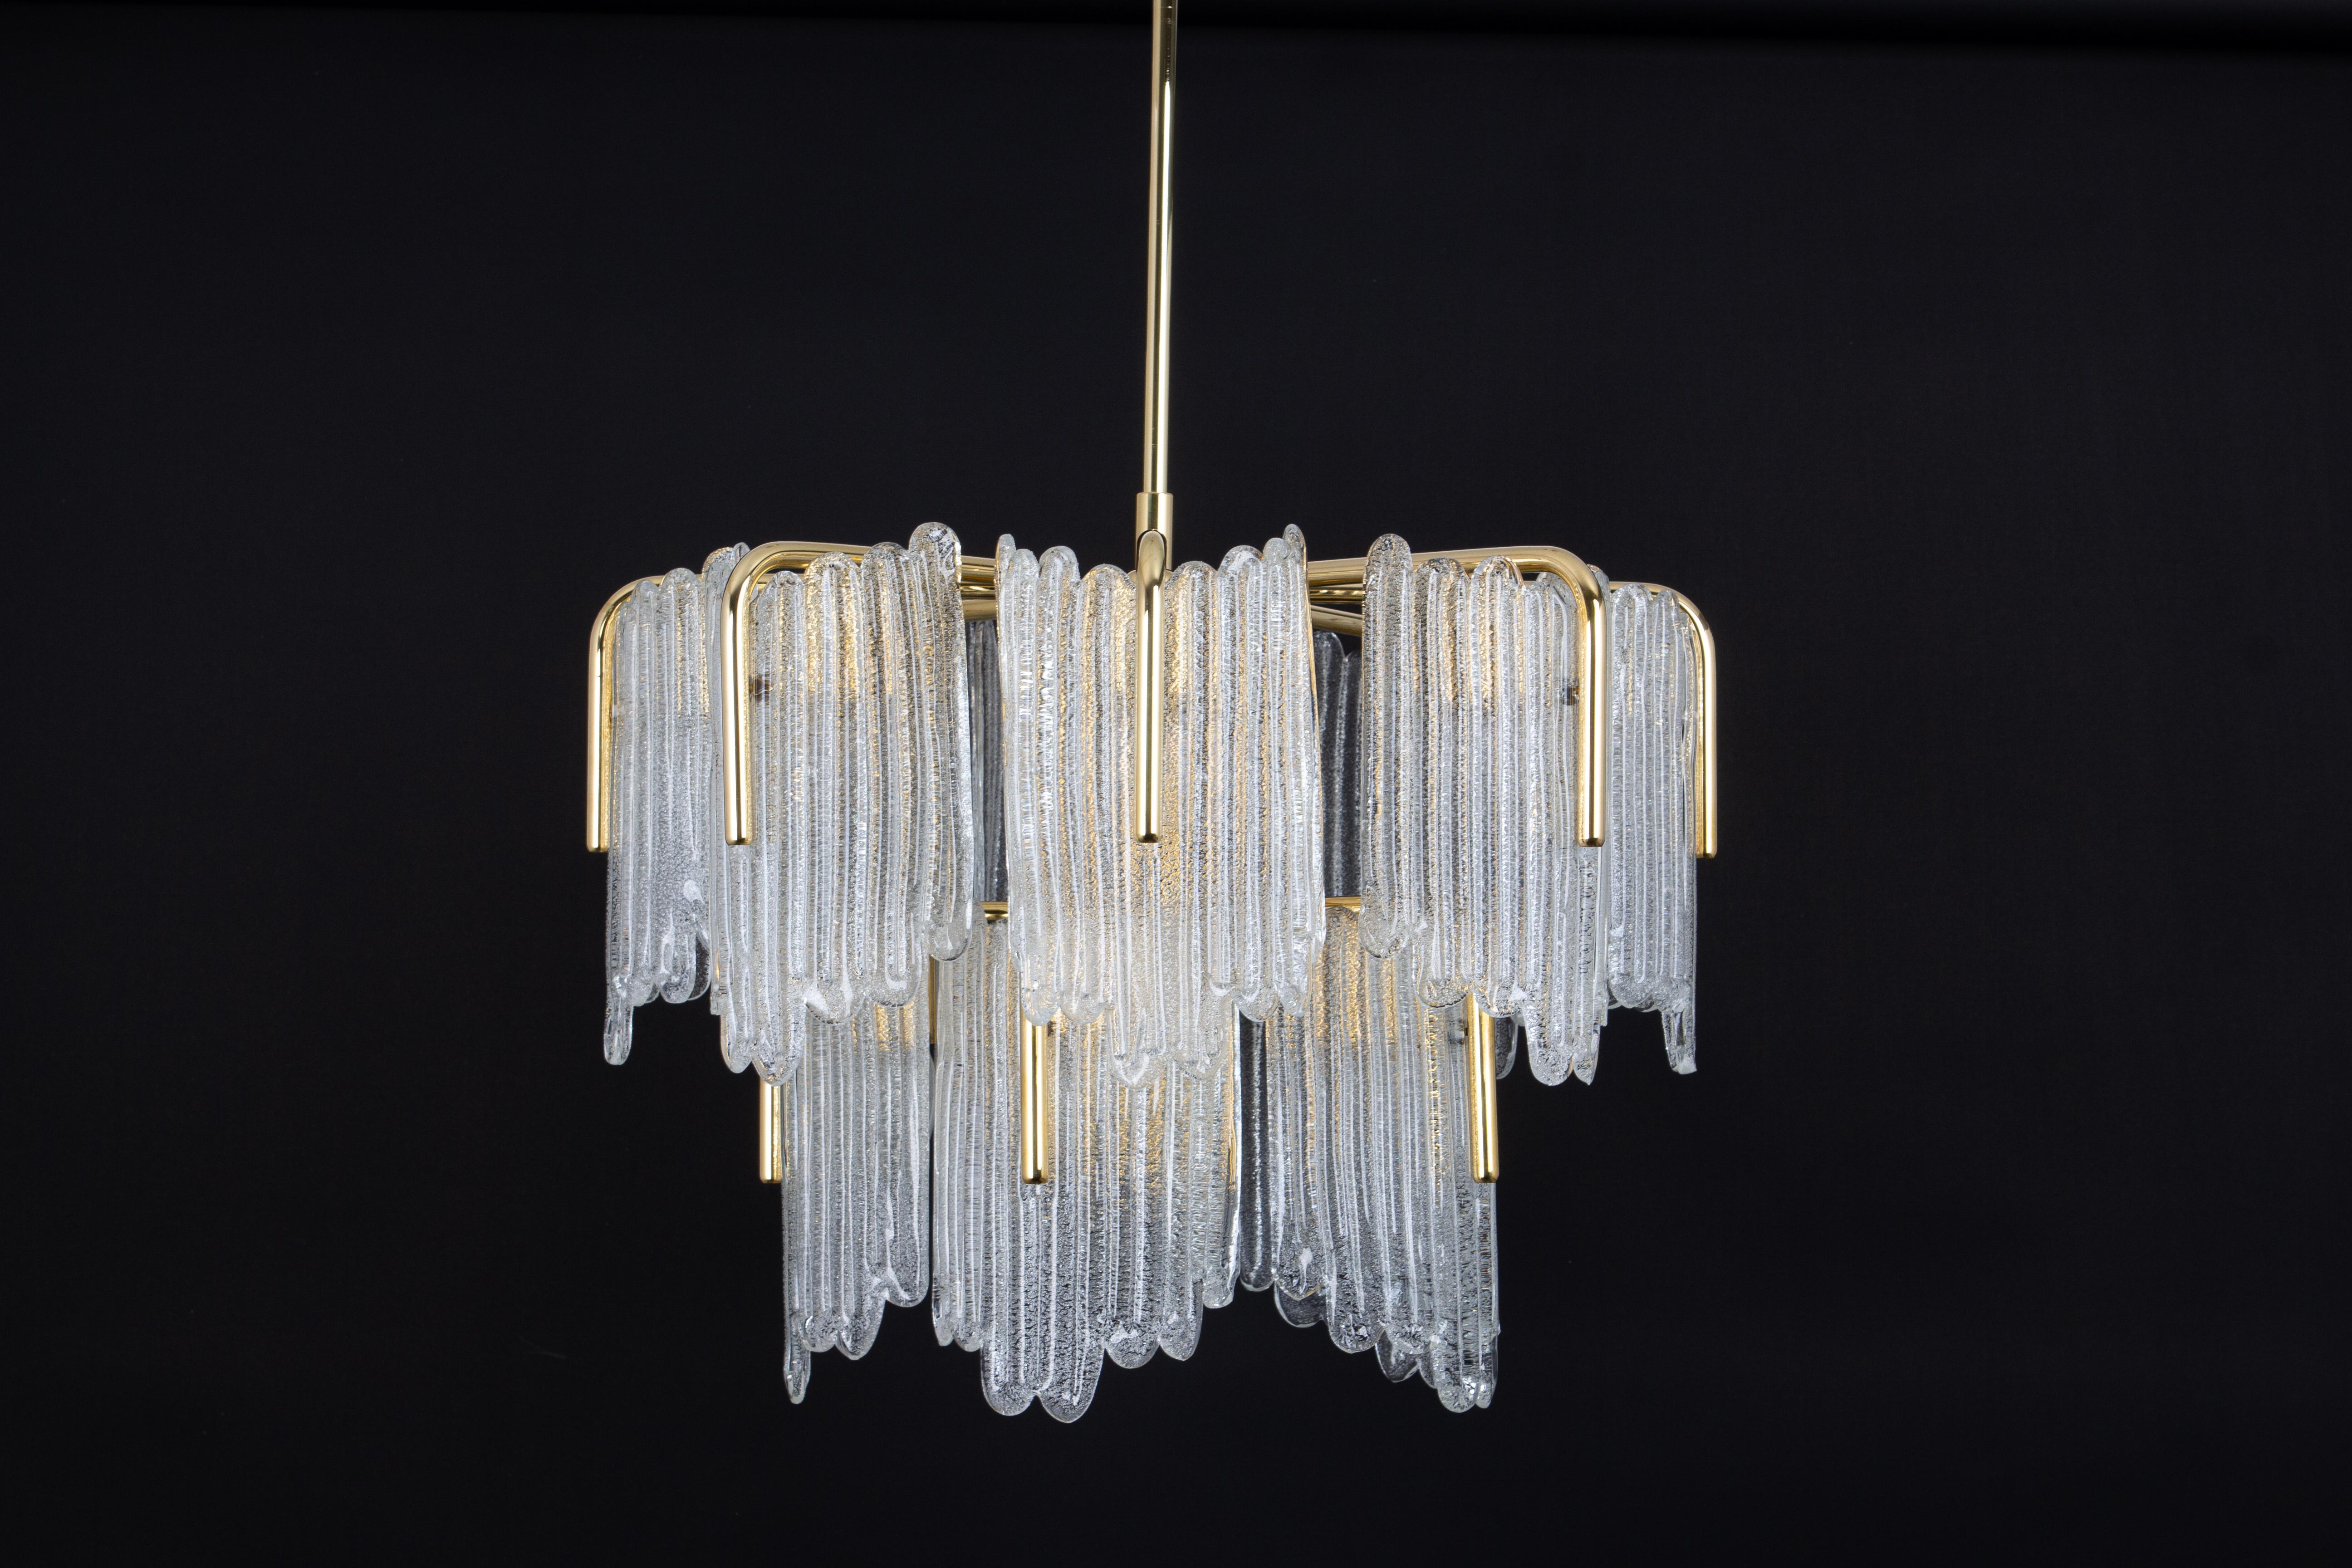 1 of 2 Stunning Carl Fagerlund Chandelier Murano Glass Leaves, 1960s For Sale 3